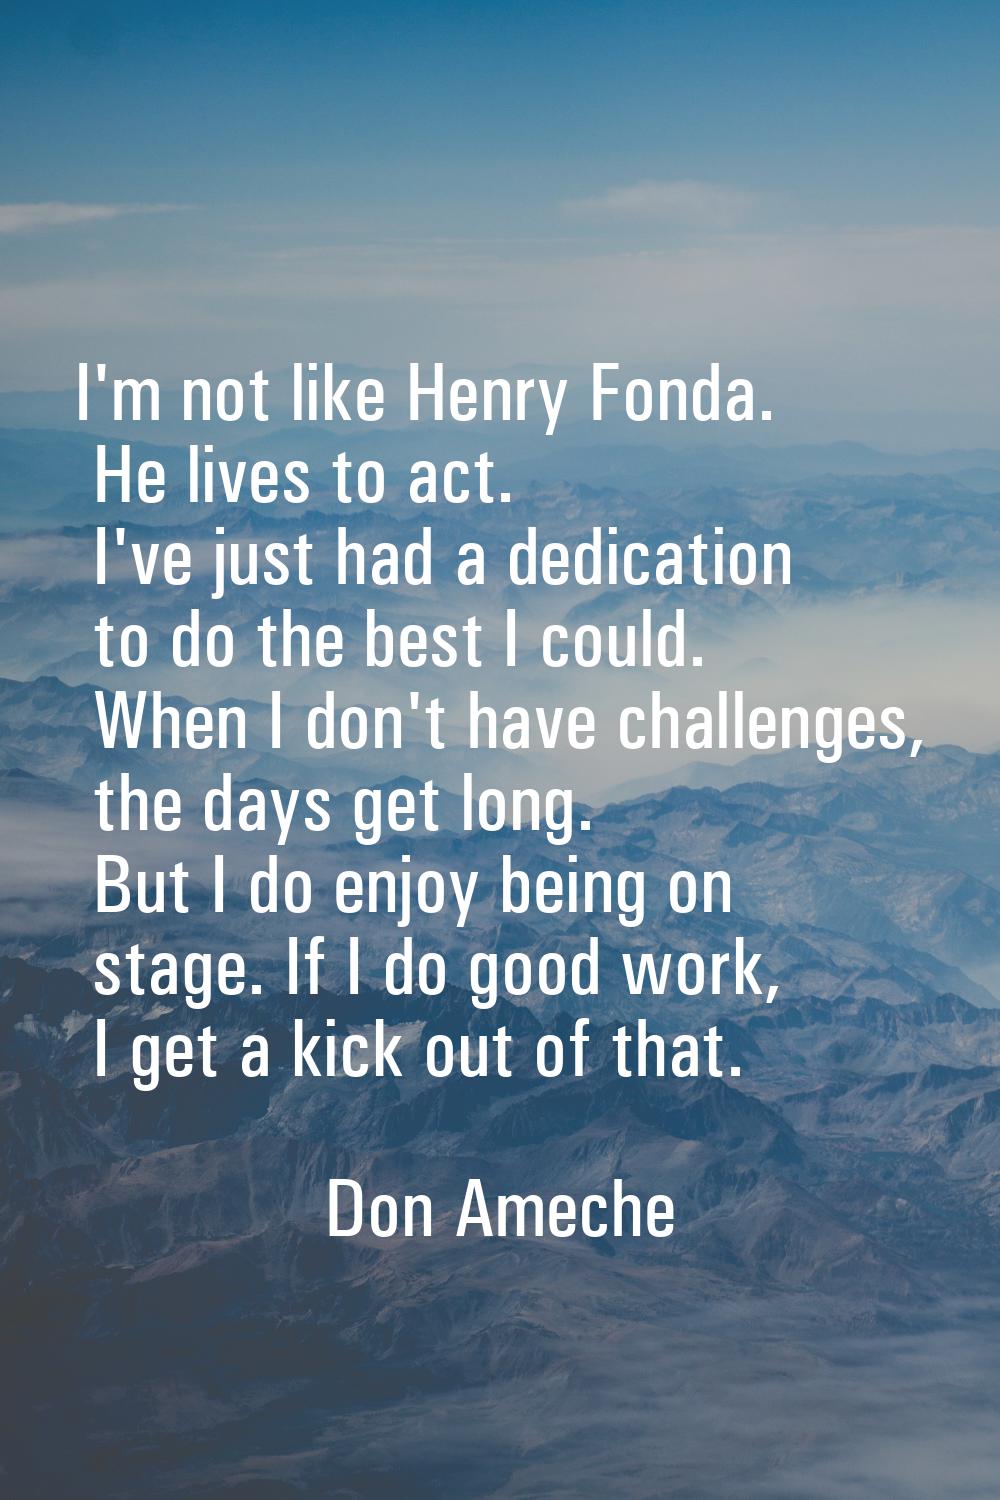 I'm not like Henry Fonda. He lives to act. I've just had a dedication to do the best I could. When 